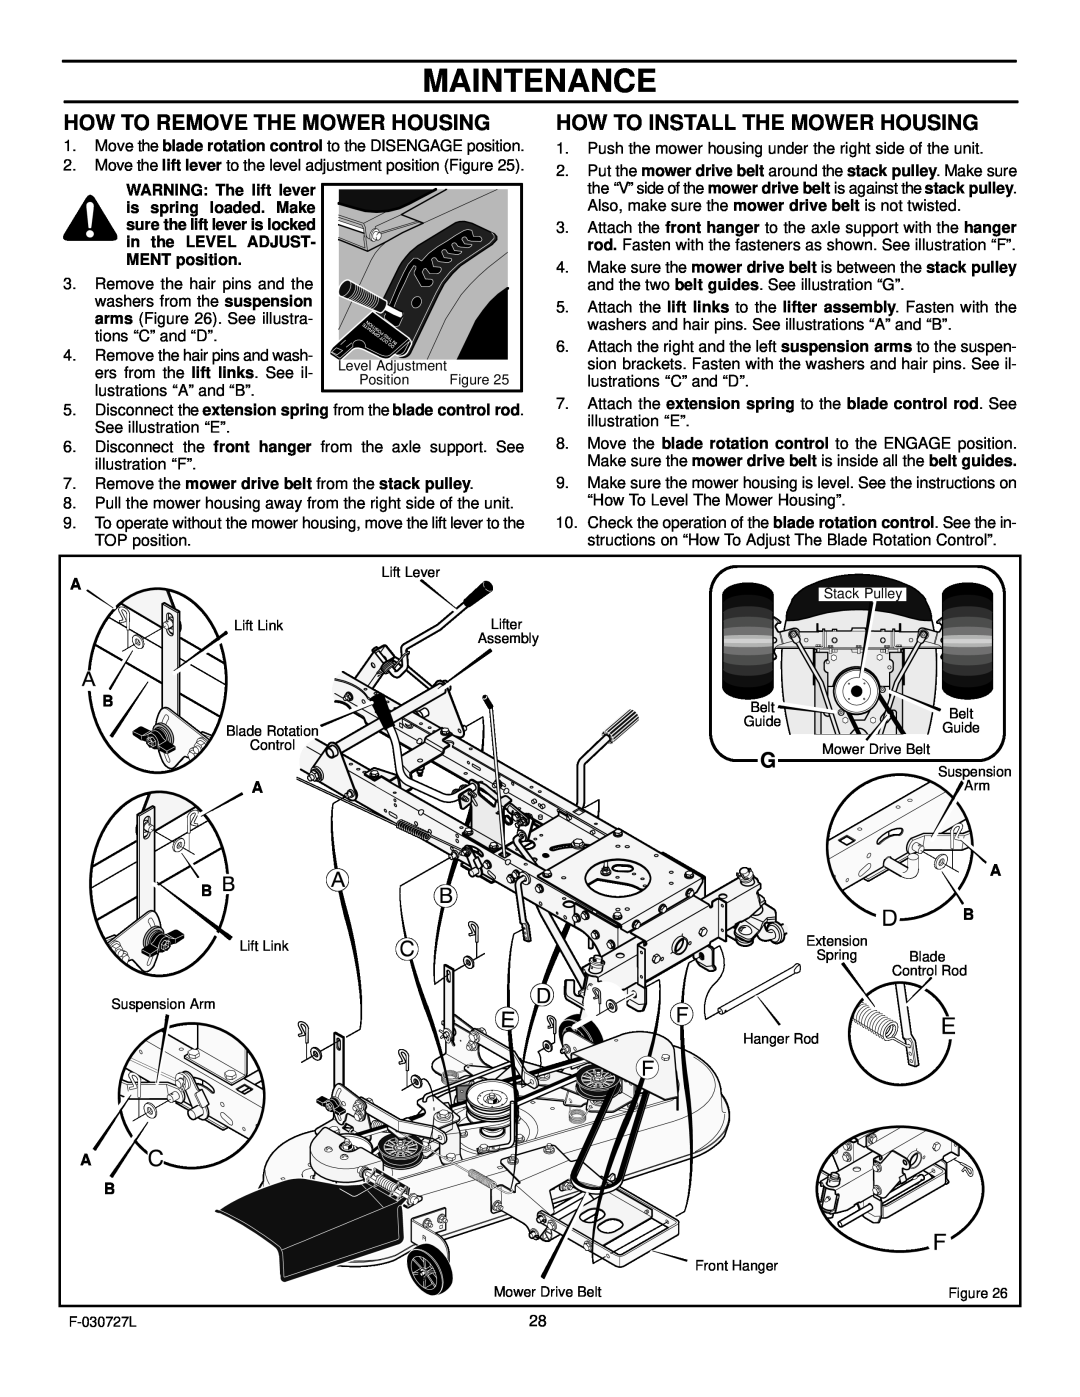 Murray 465600x8A manual Maintenance, How To Remove The Mower Housing, How To Install The Mower Housing, Suspension 